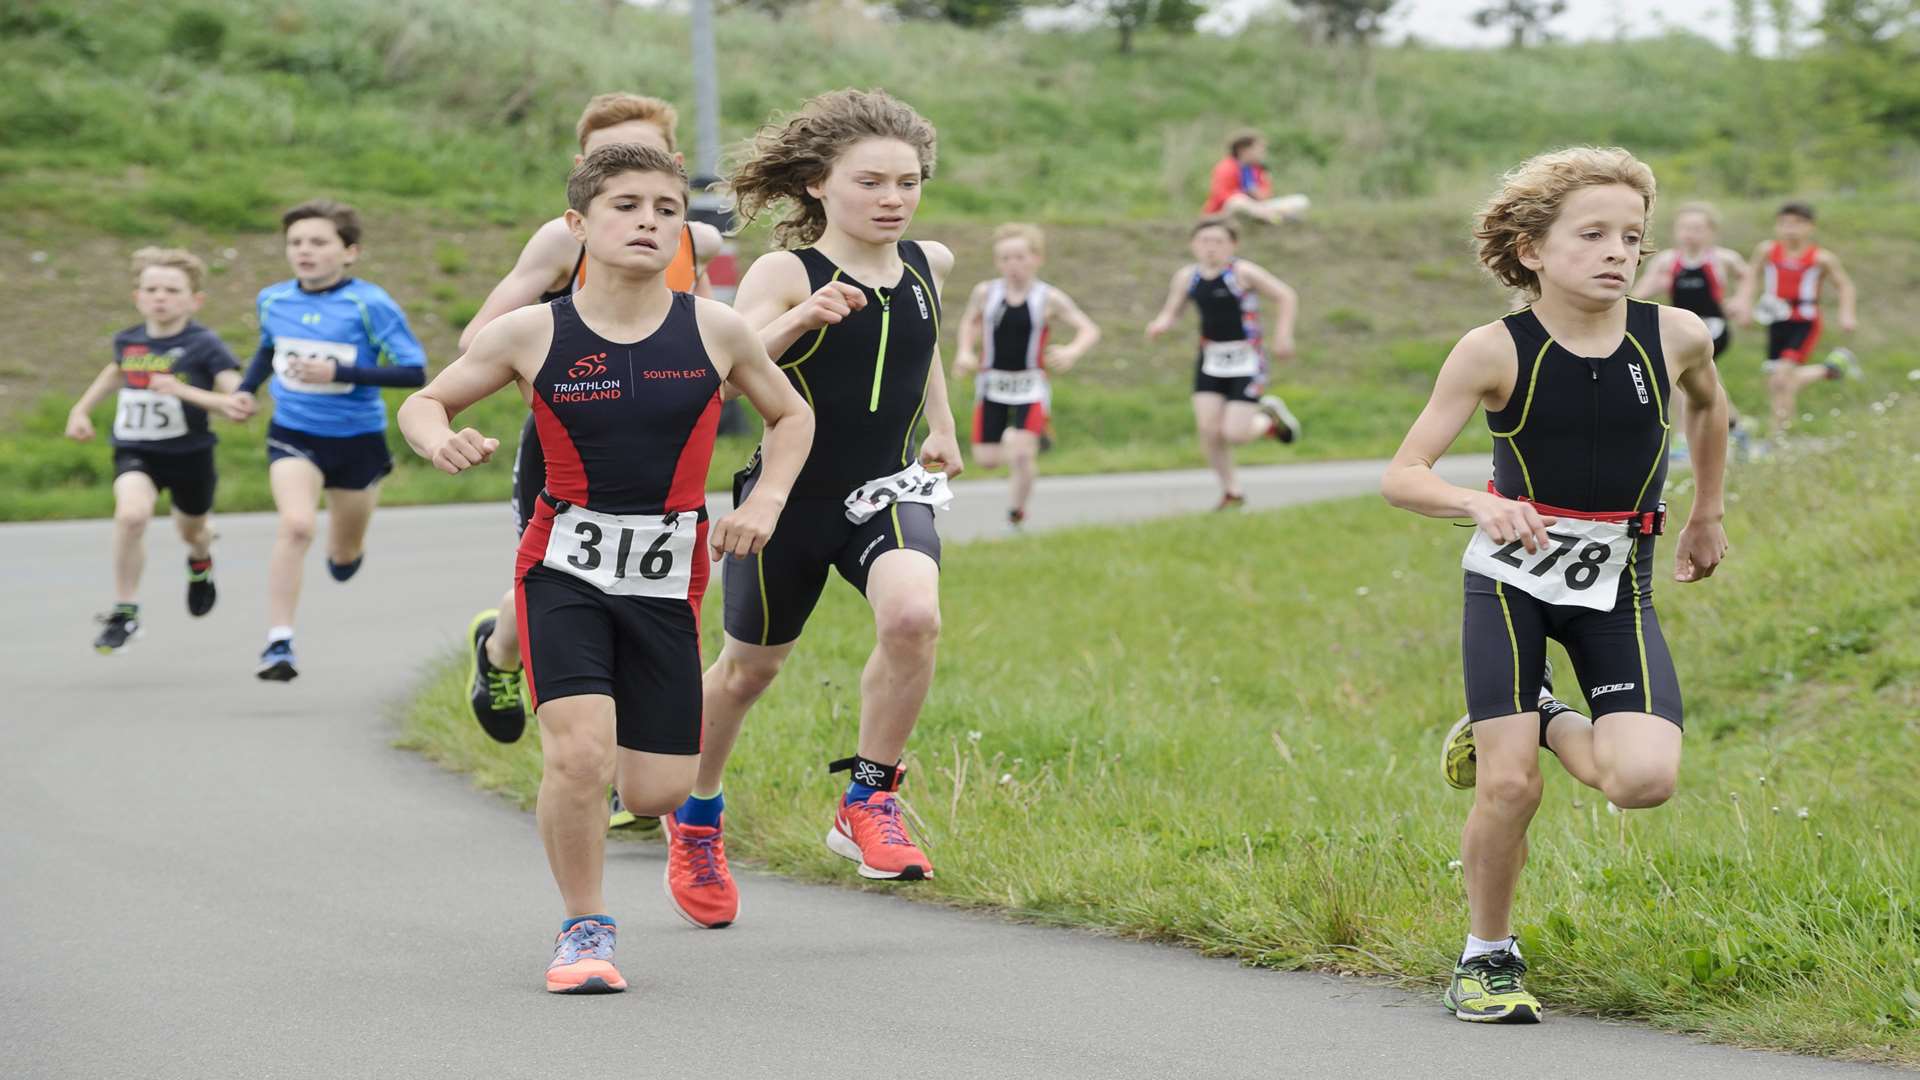 The MedwayTri Junior and Adult Duathlon was taking place when the accident occurred in a different part of the Cyclopark. Picture: Andy Payton